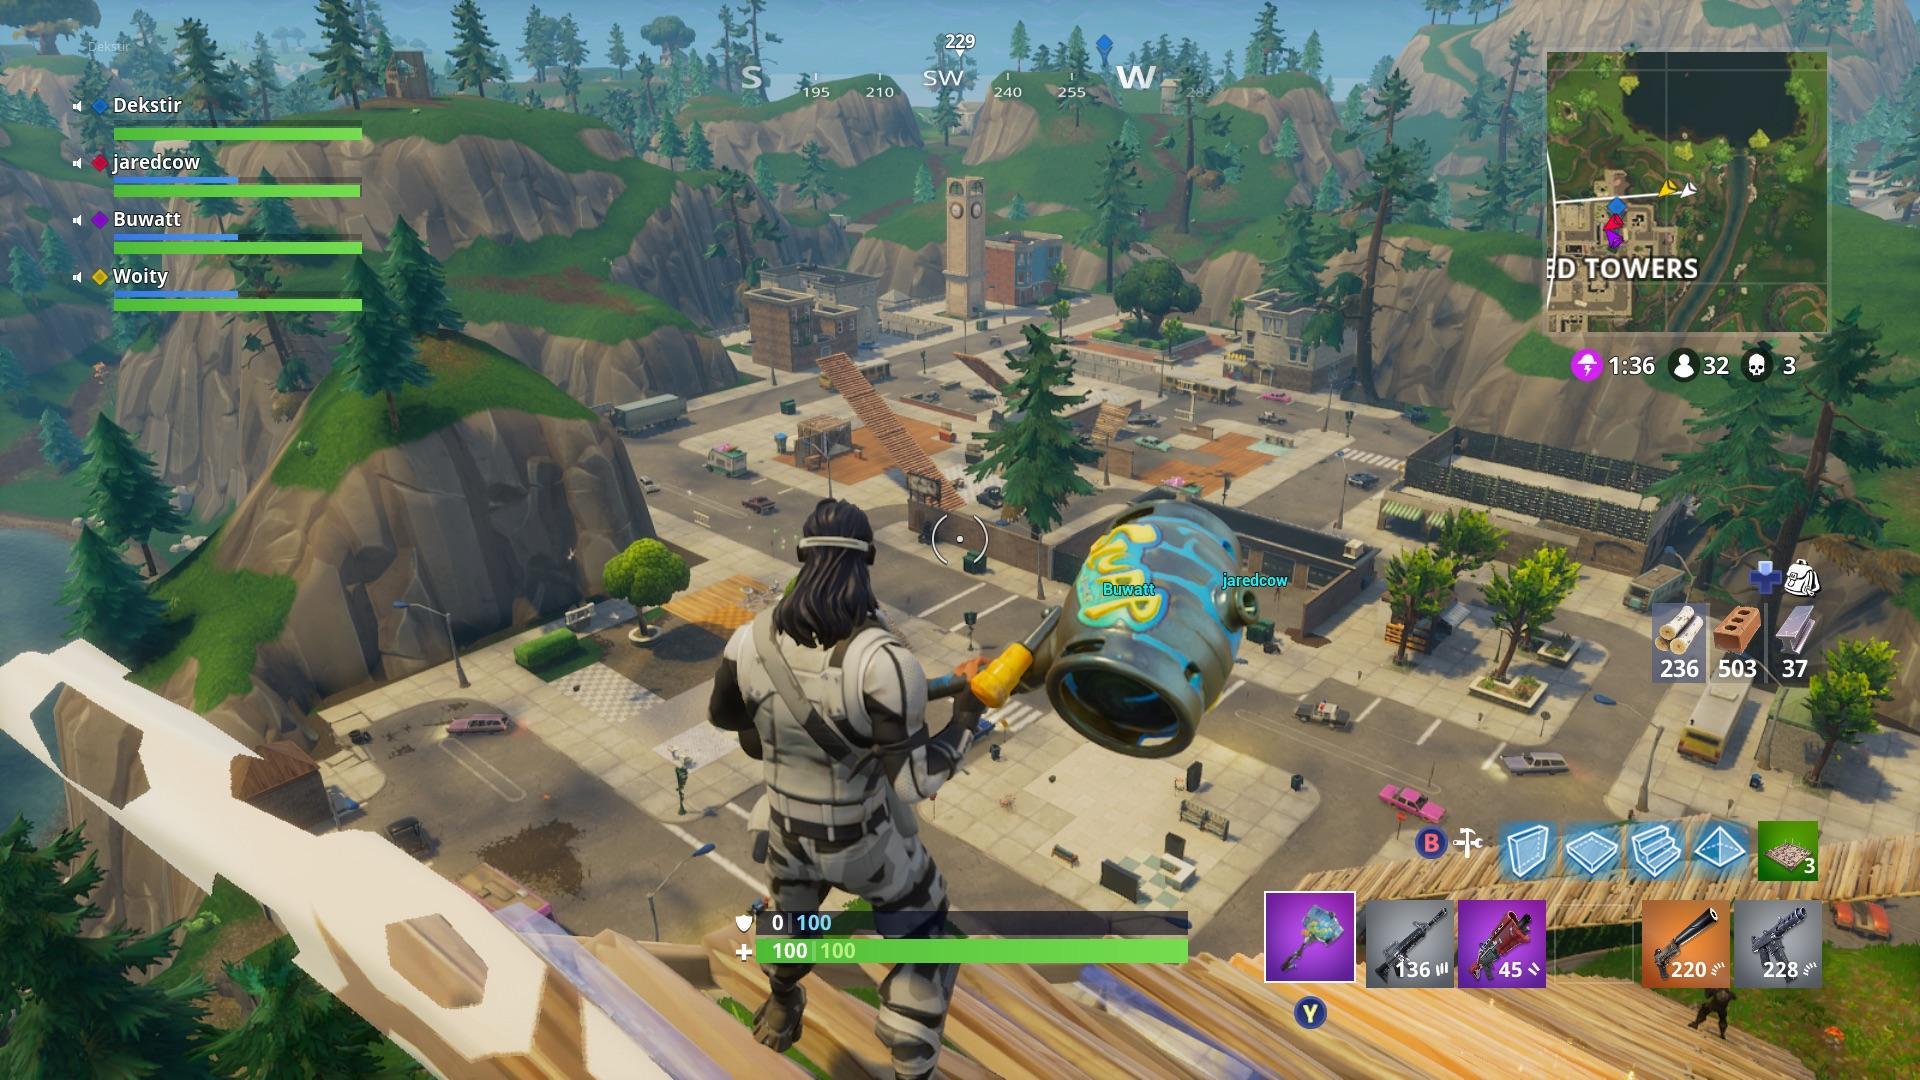 Destroyed Tilted Towers as much as the storm would let us. Any